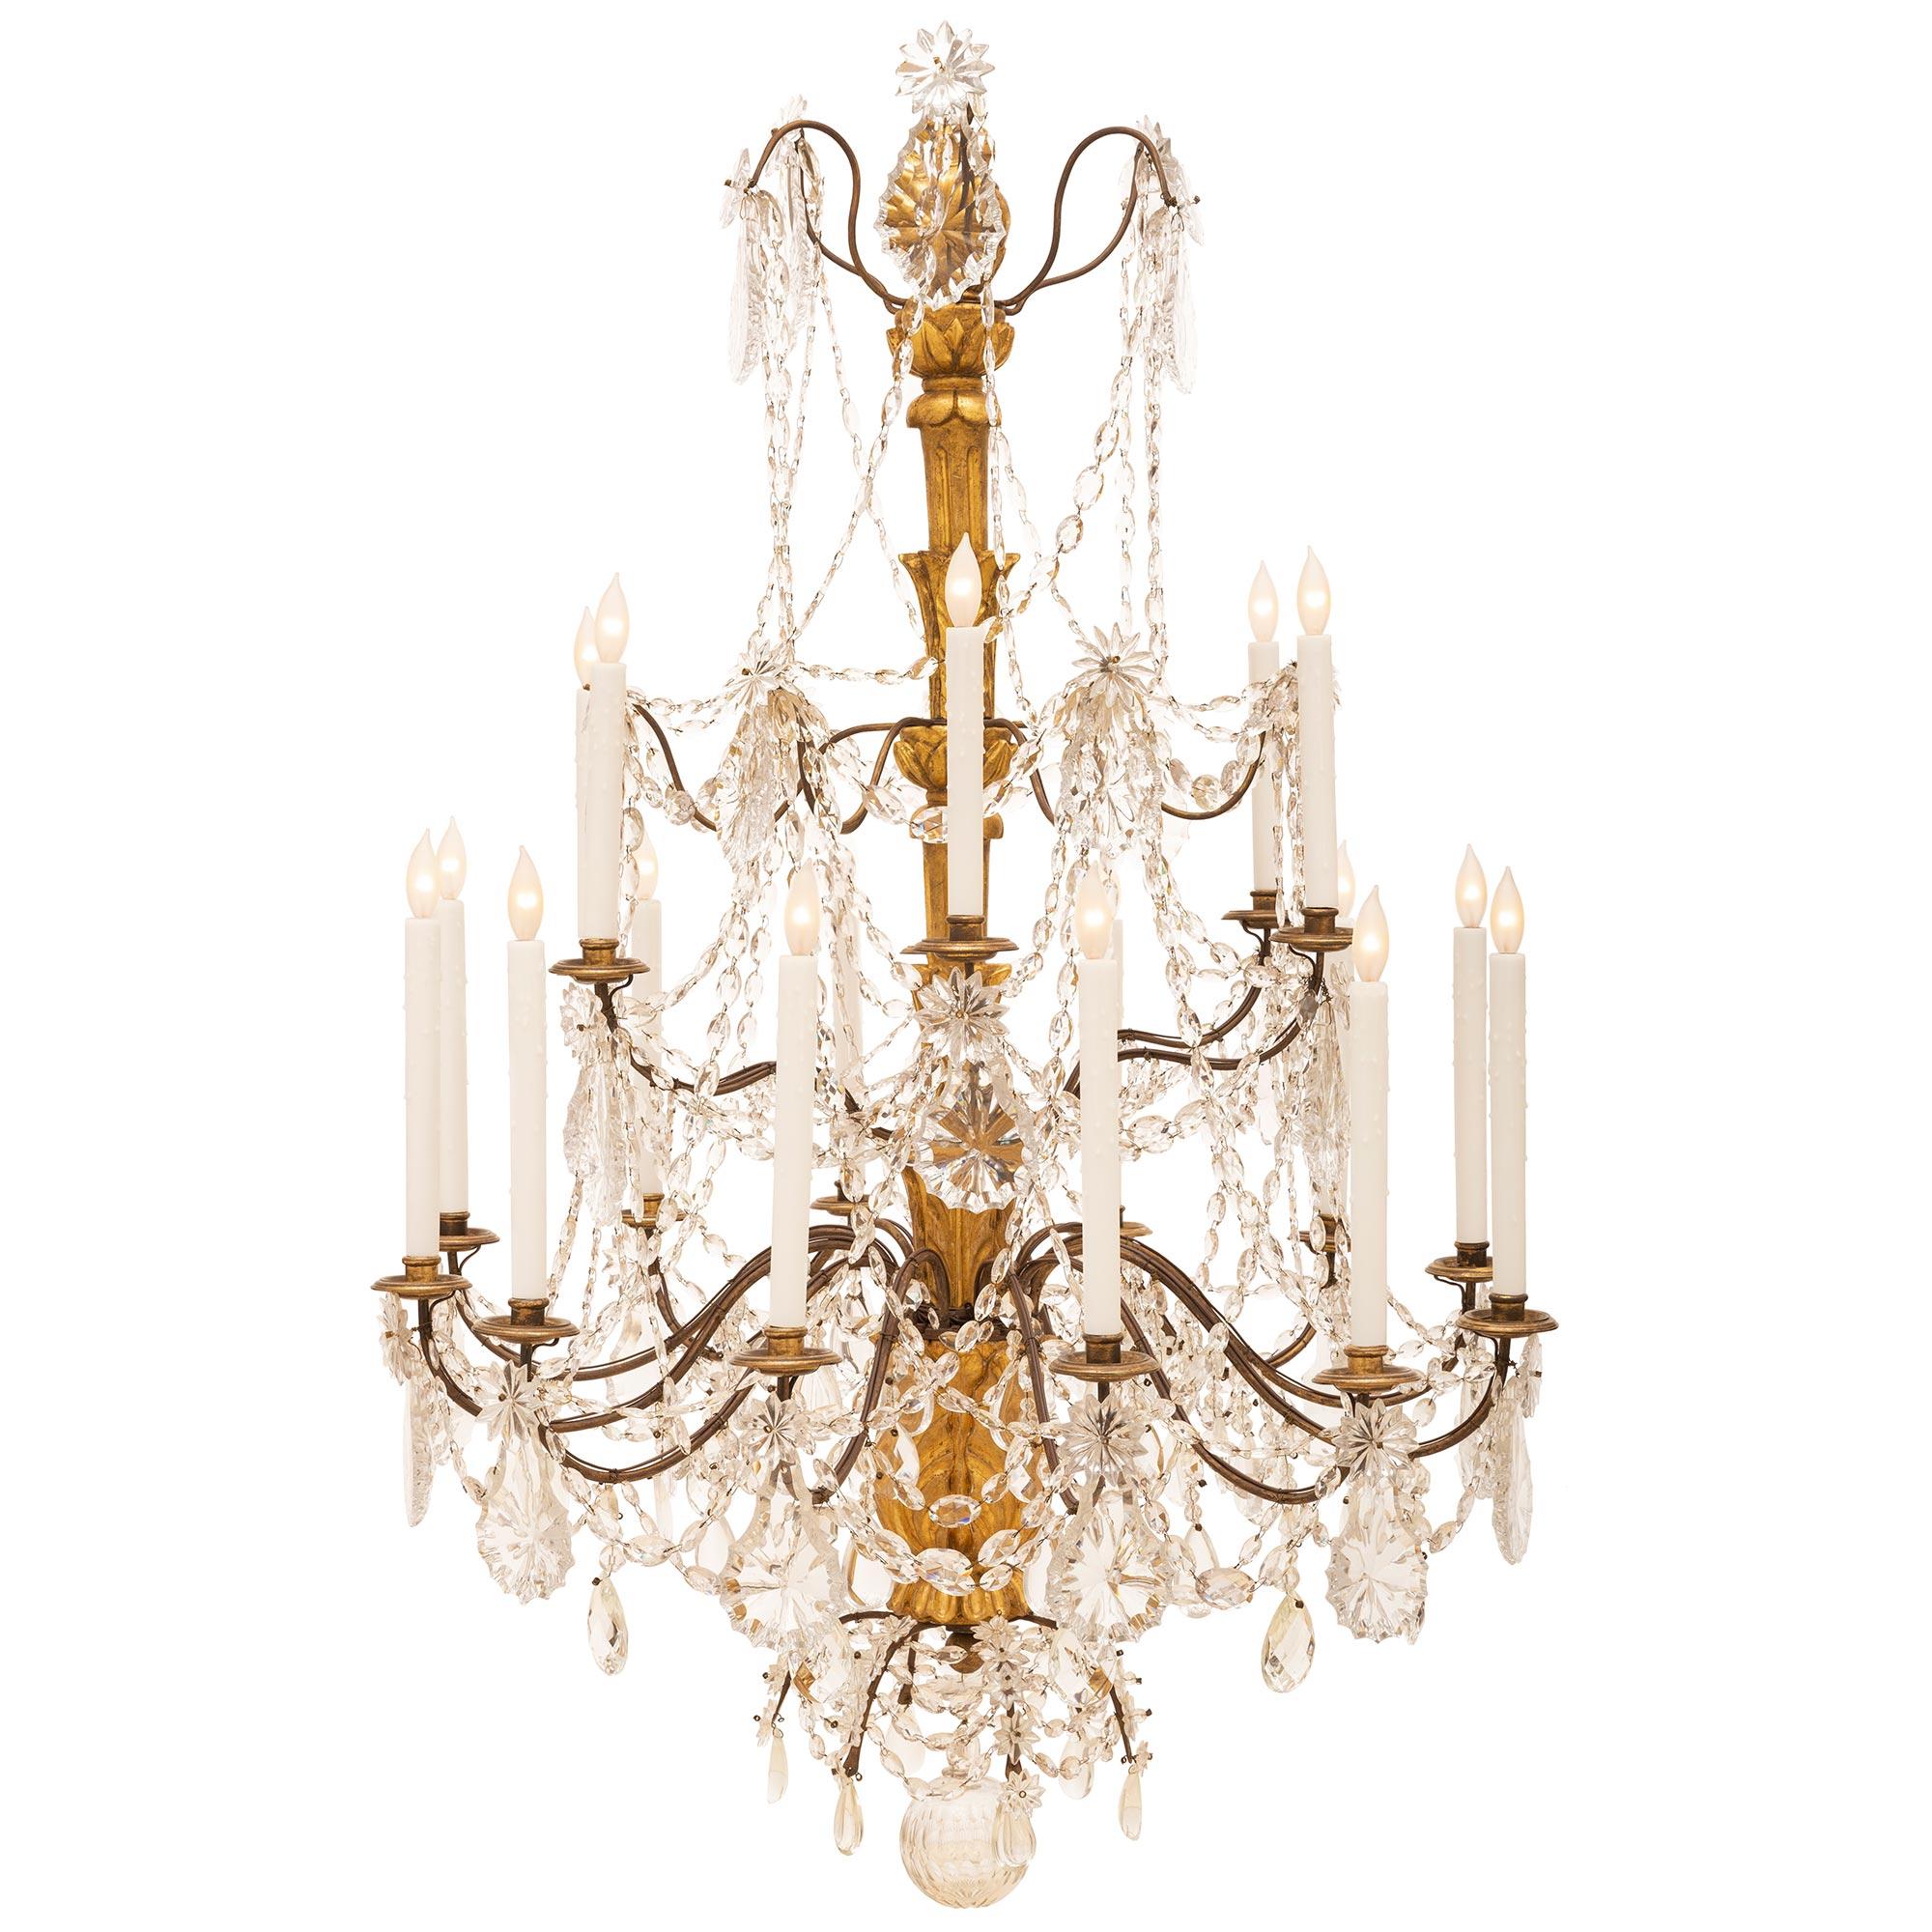 A stunning and unique Italian 19th century eighteen light giltwood, patinated bronze and crystal chandelier from Northern Italy. The chandelier has an elegant hand blown cut crystal bottom sphere surrounded by a lovely spray of tear drop shaped cut